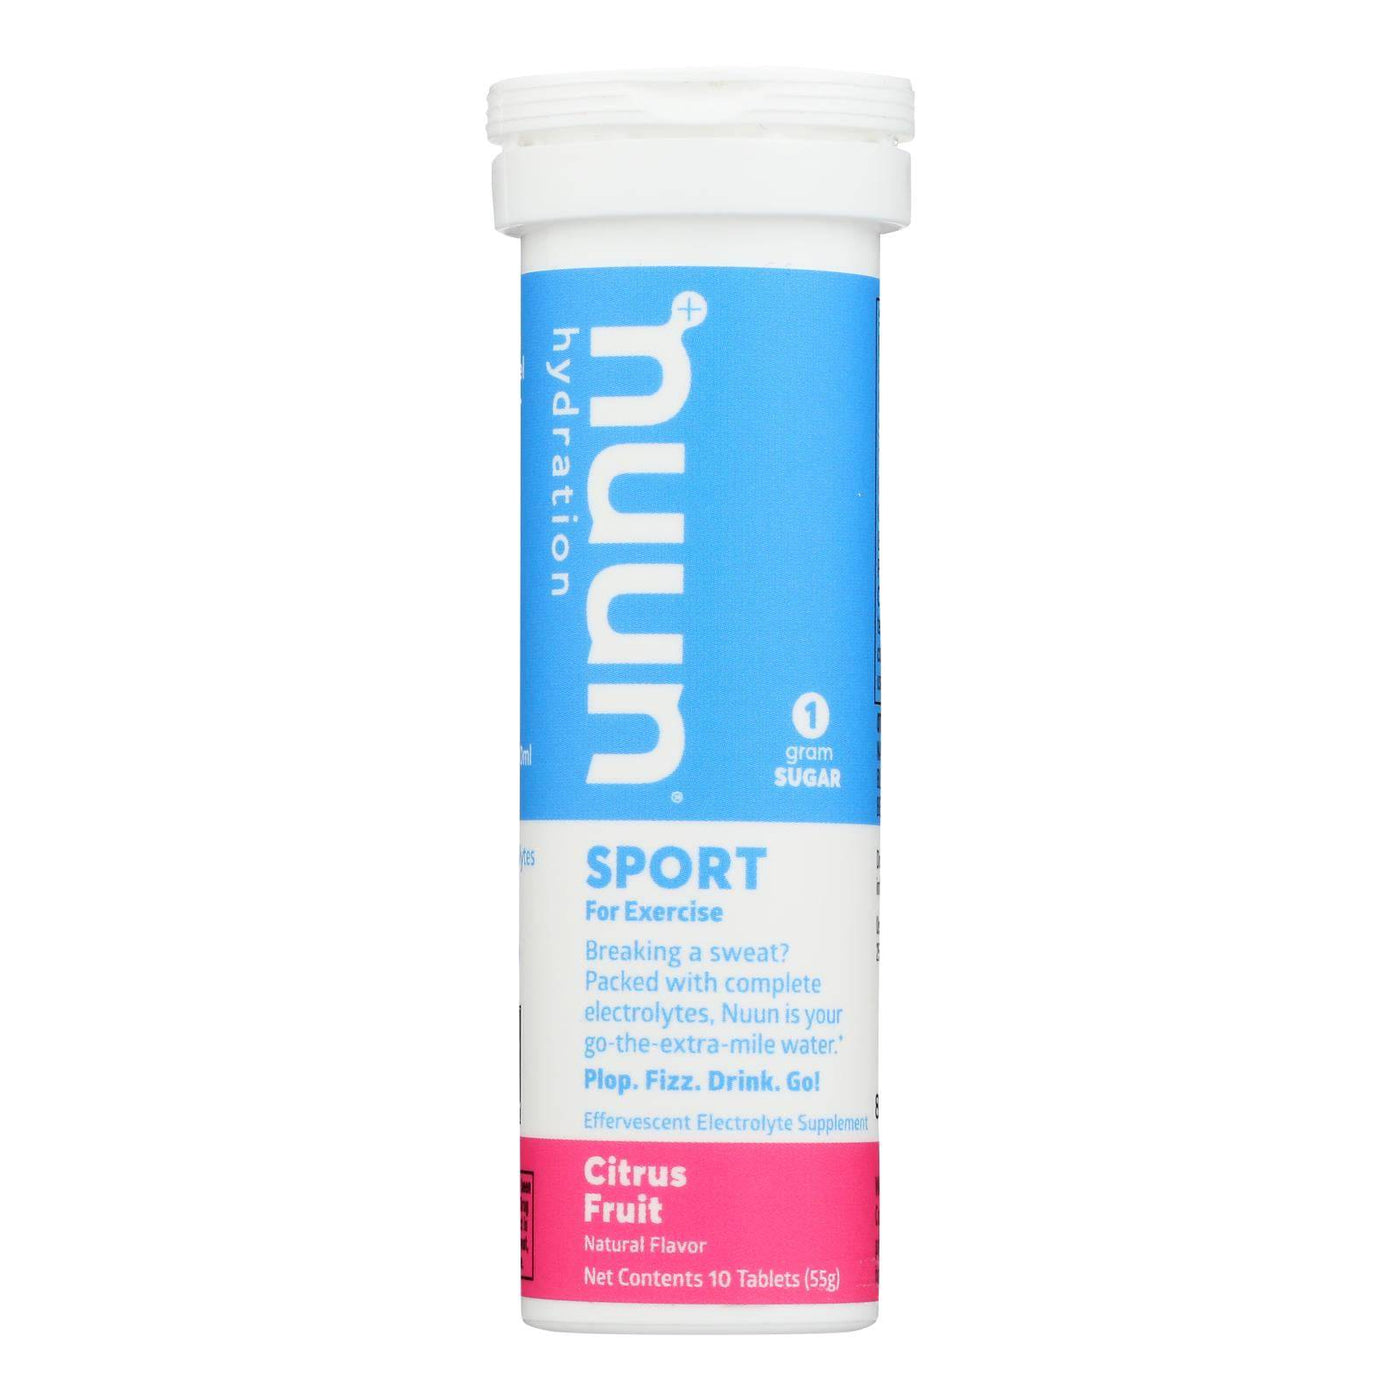 Buy Nuun Hydration Nuun Active - Citrus Fruit - Case Of 8 - 10 Tablets  at OnlyNaturals.us